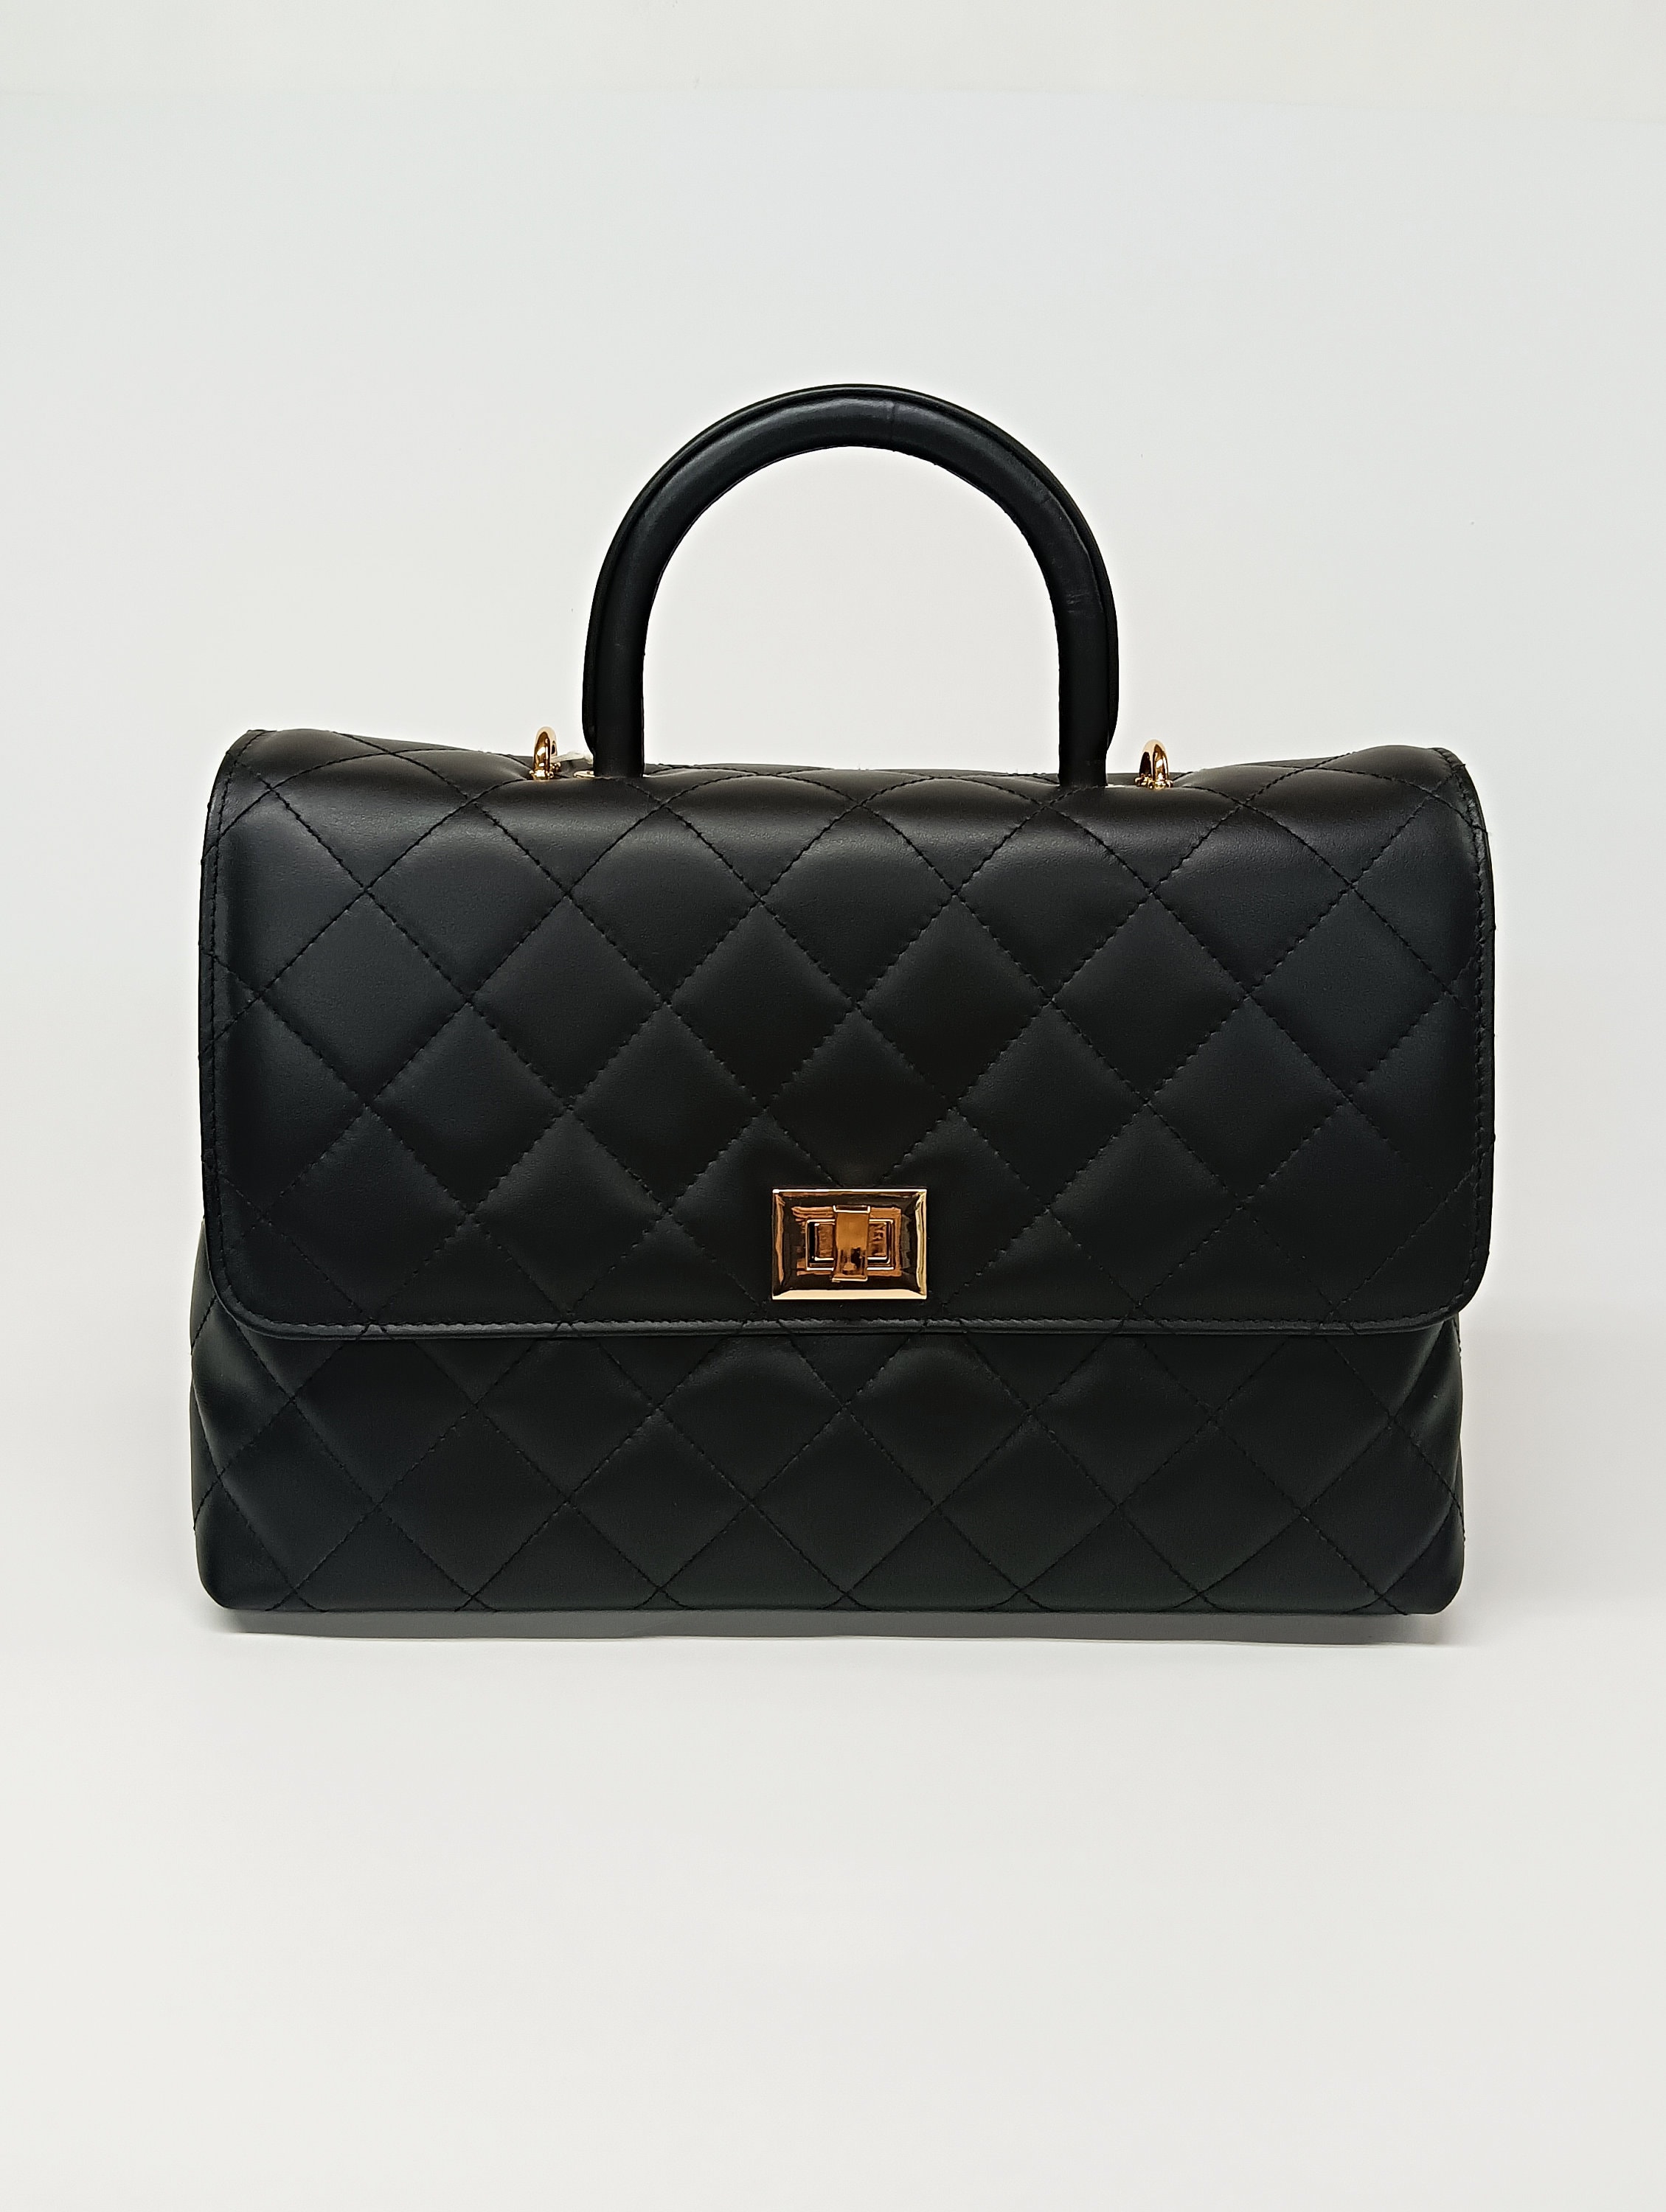 Classic Style Genuine Leather Flap Bag Quilted Elegant Large